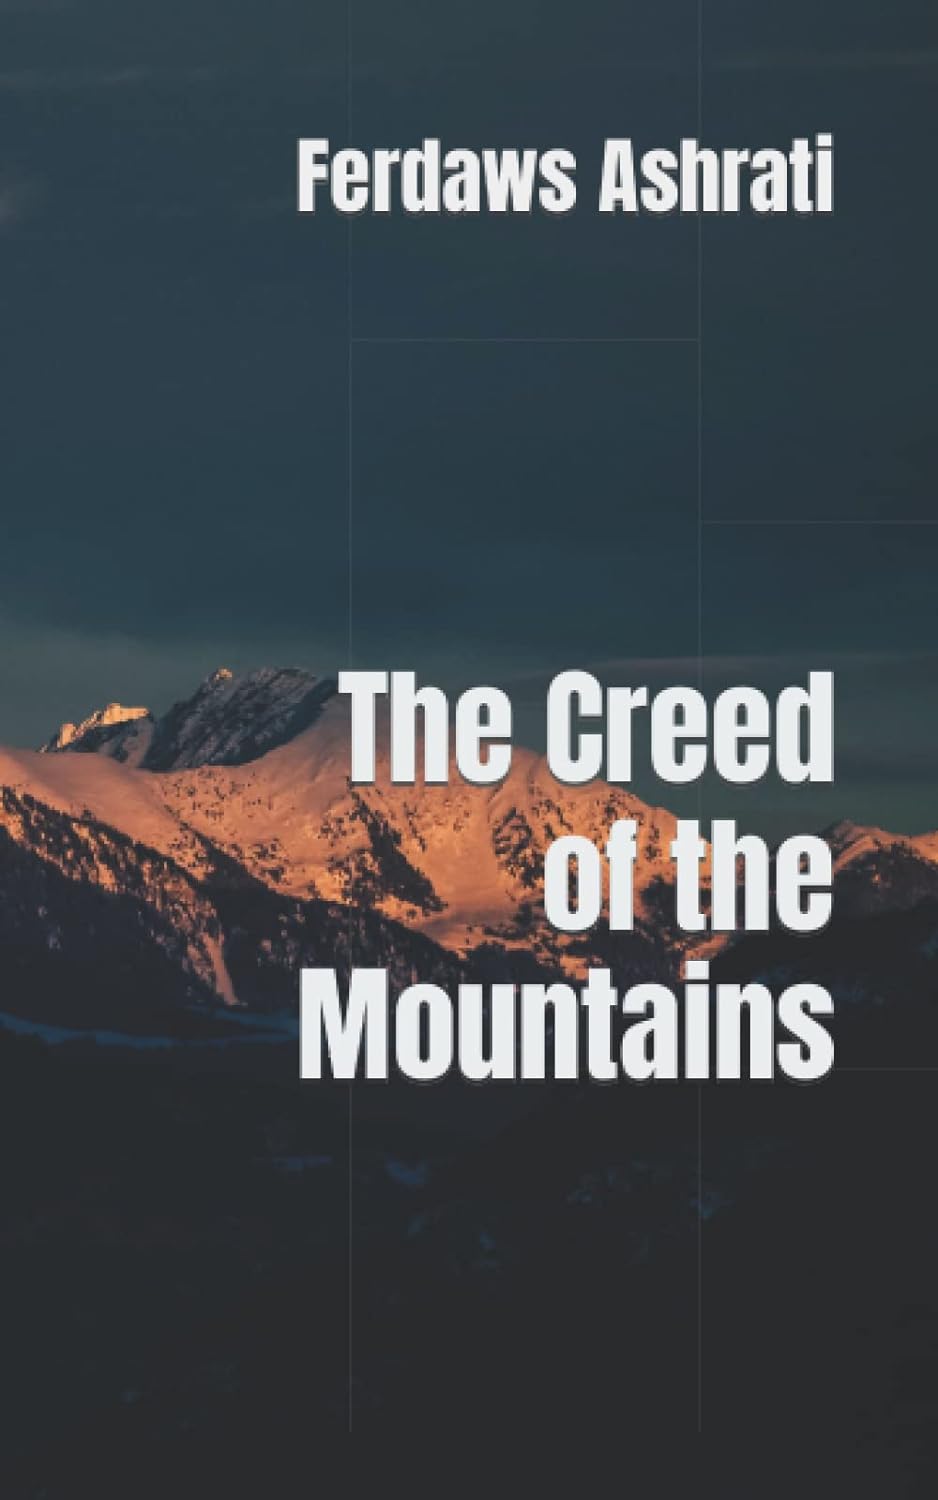 FICTION: THE CREED OF THE MOUNTAINS